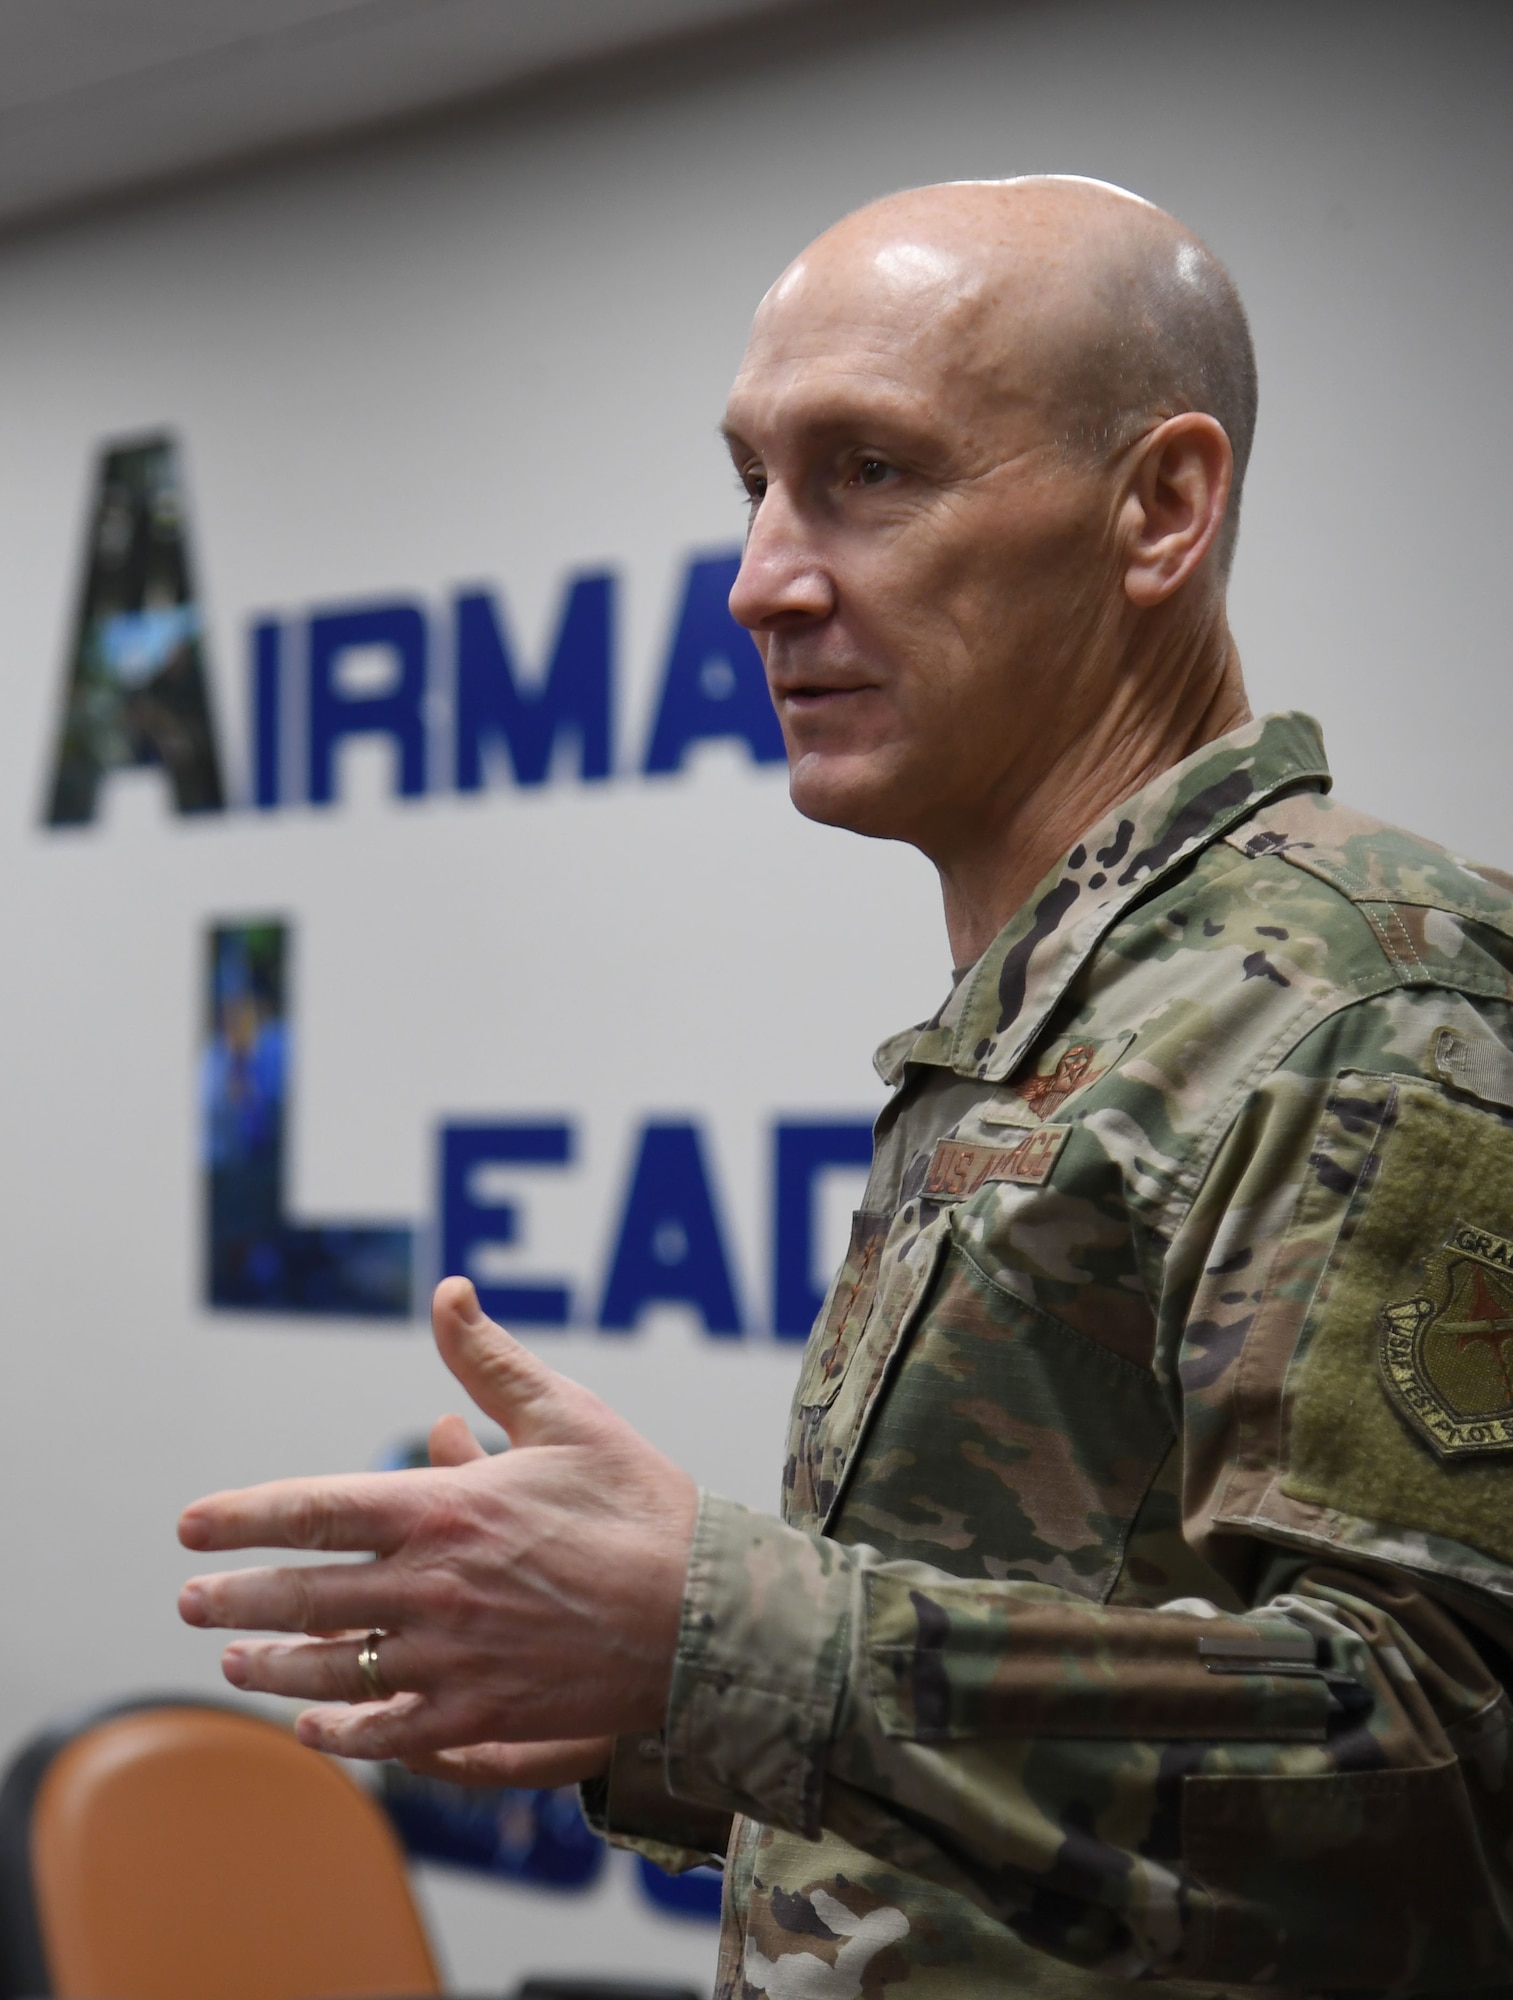 U.S. Air Force Gen. David Allvin, Vice Chief of Staff of the Air Force, delivers remarks during a Dragon University classroom visit inside the Professional Development Center at Keesler Air Force Base, Mississippi, Nov. 18, 2022.